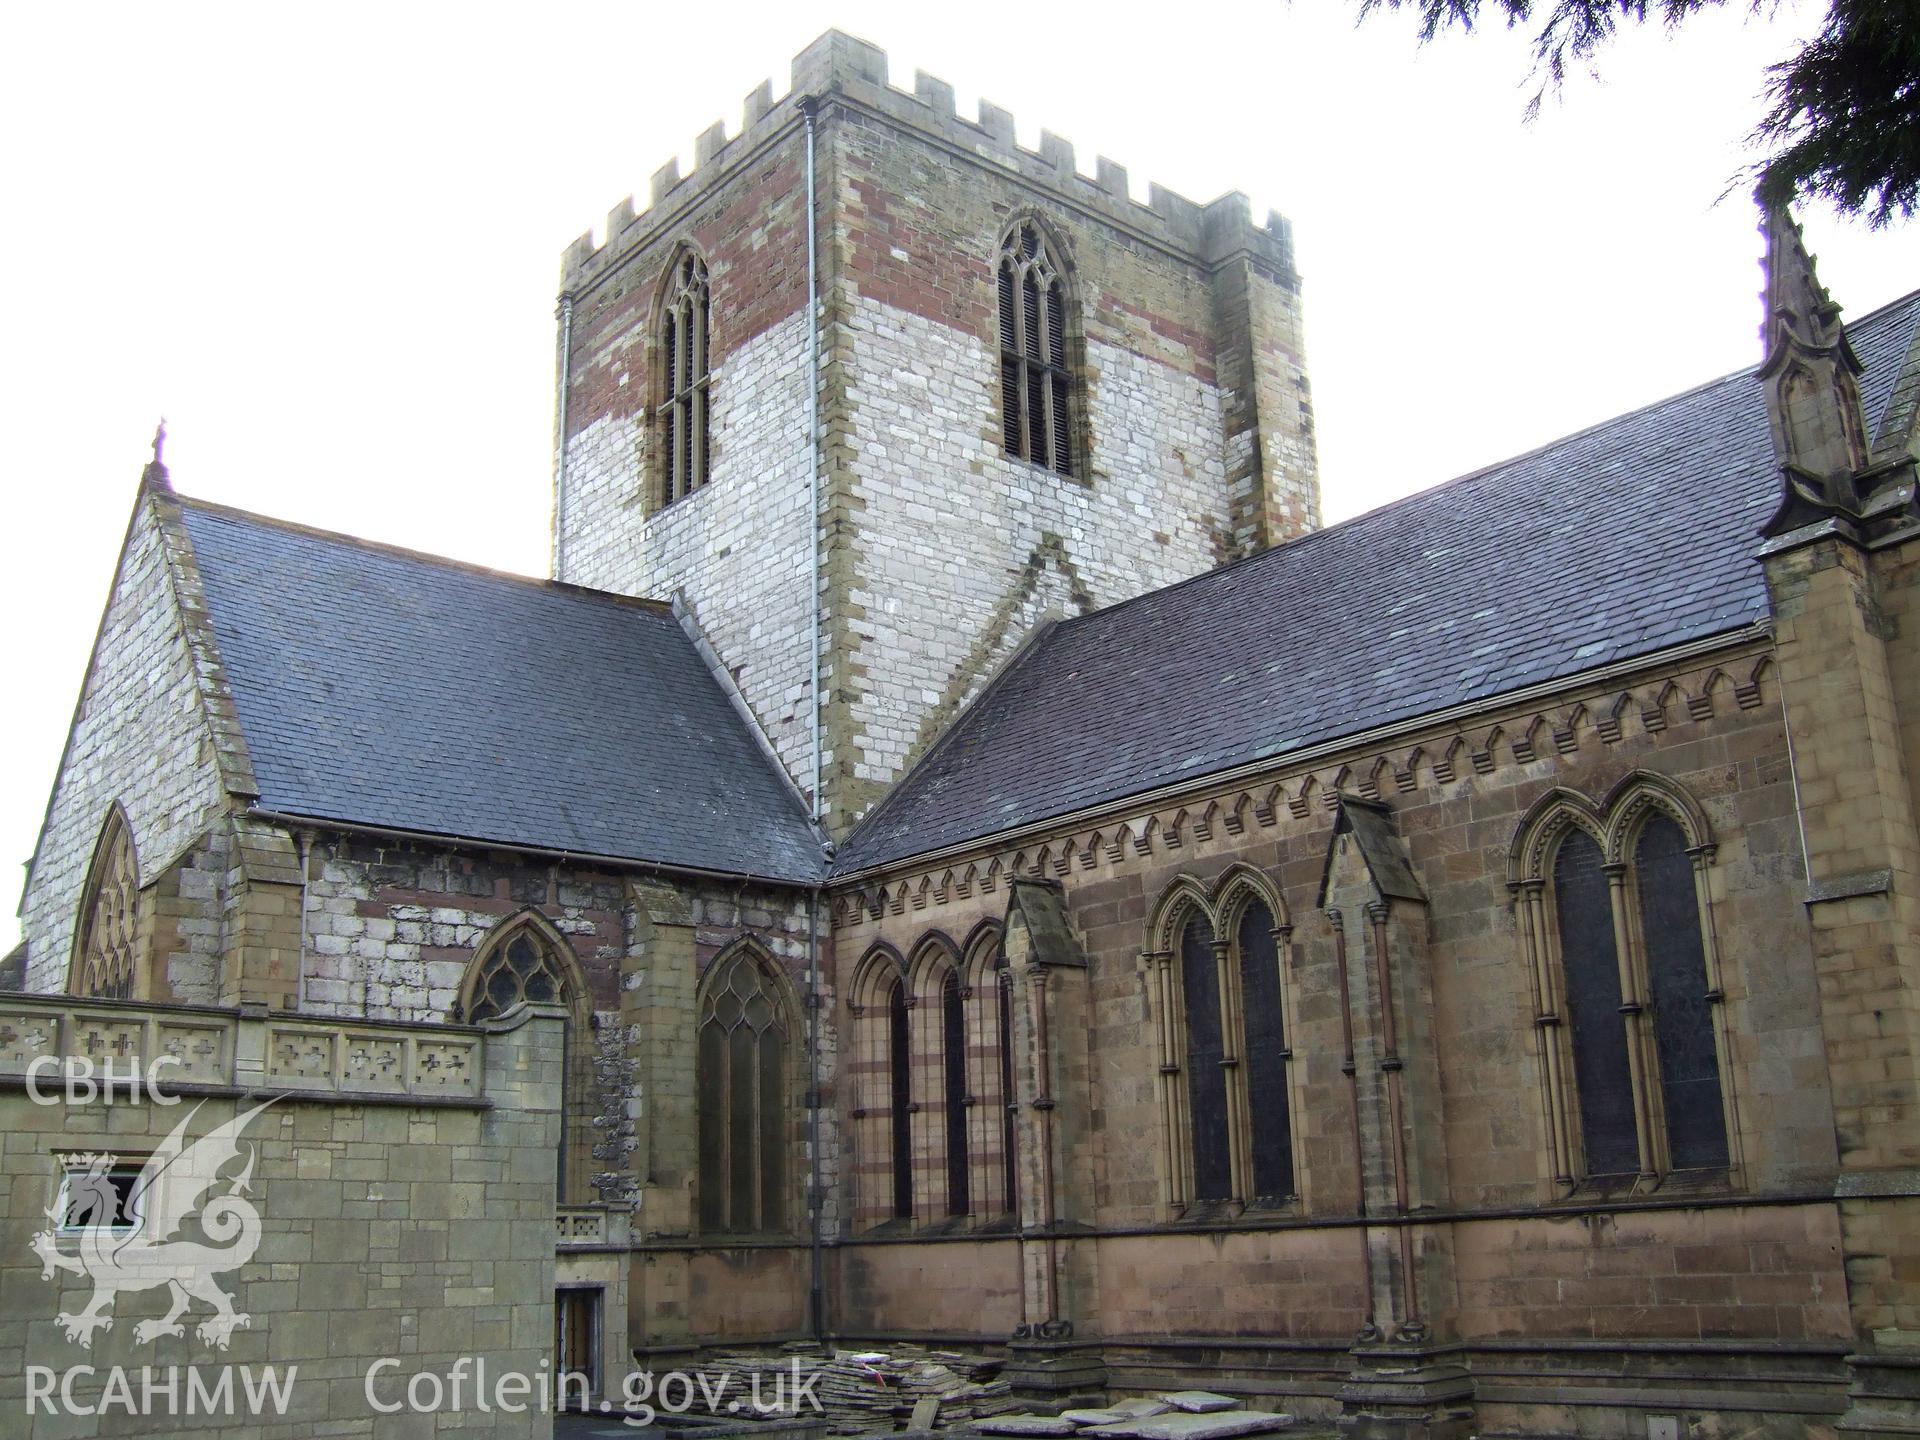 Central tower, chancel (right) and south-east transept (left) from the south-east.